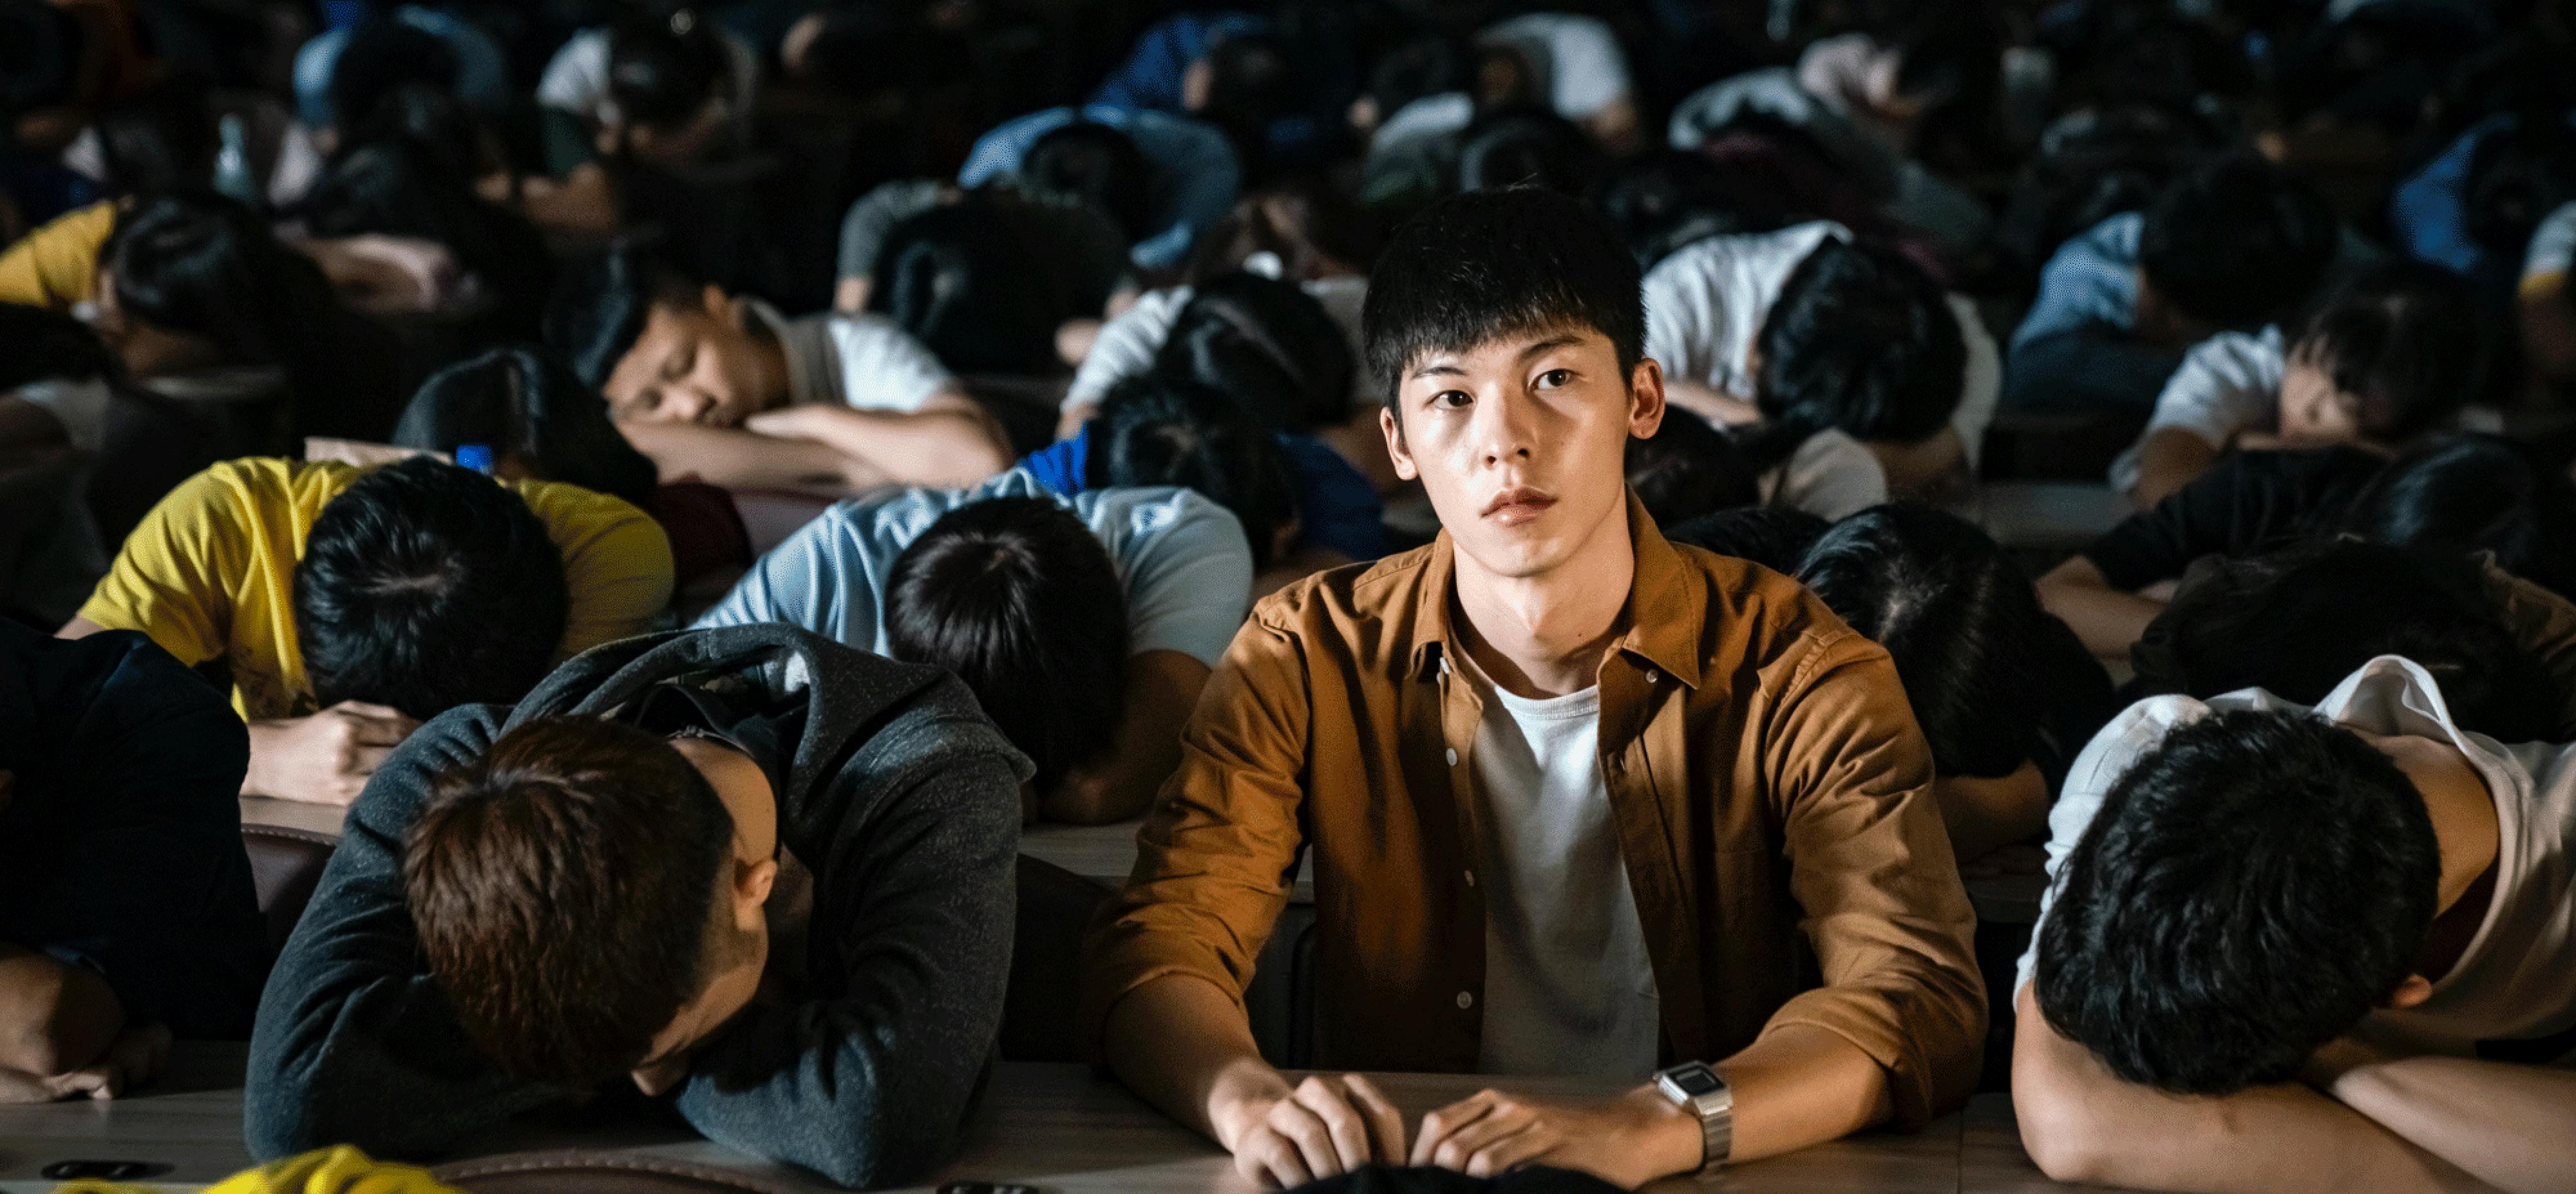 Hsu Kuang-han as A-hao in A Sun. This still from the film shows a crowd of young men, all sleeping with their heads down on their desks. Only A-hao sits upright, looking into the distance.